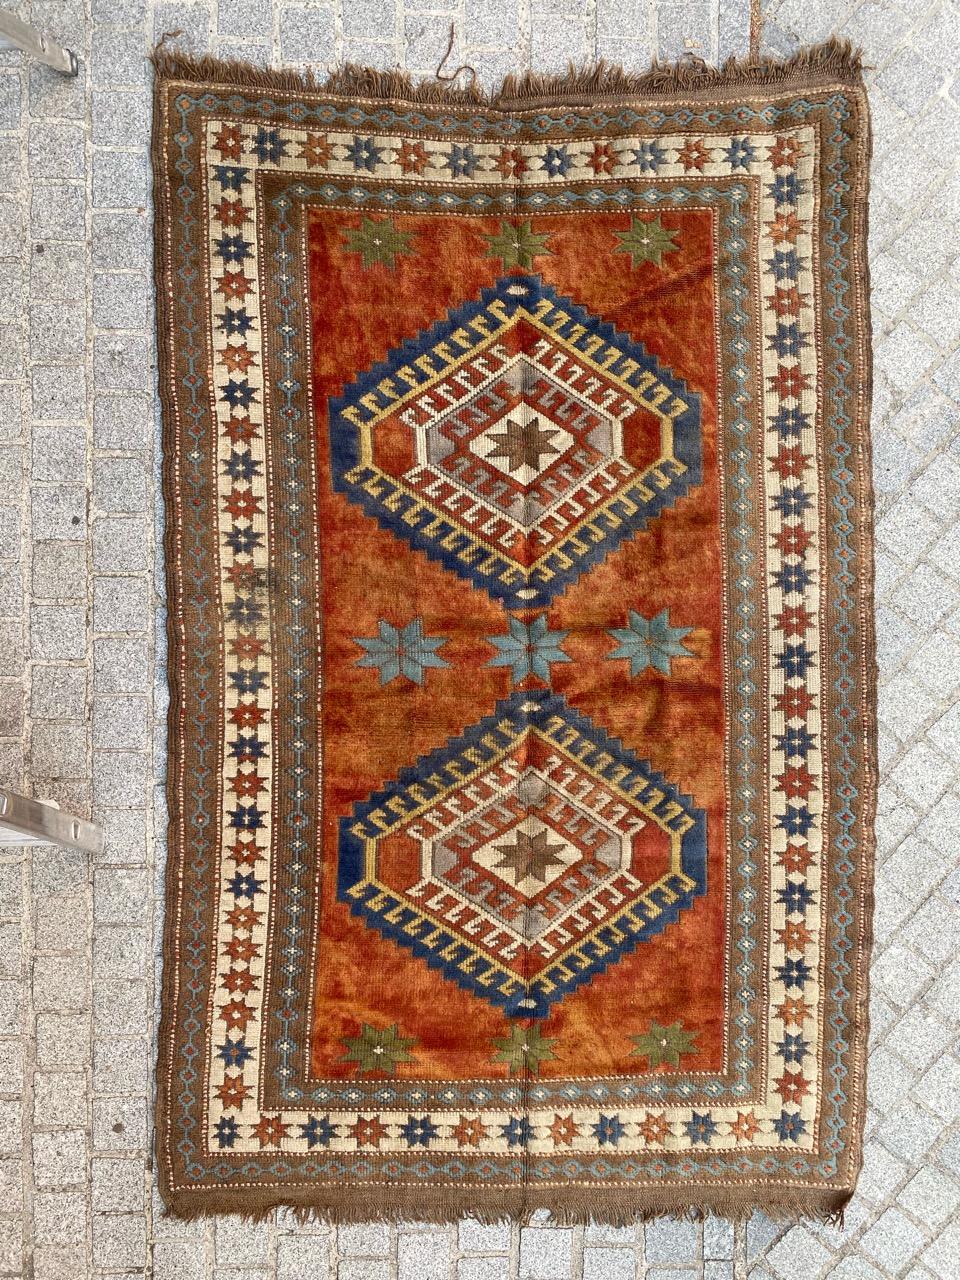 Exquisite vintage Turkish rug from the Kars region, dating back to the mid-20th century. This handmade masterpiece features intricate hand-knotted craftsmanship in wool on wool, showcasing a design reminiscent of antique Caucasian Kazak rugs. The